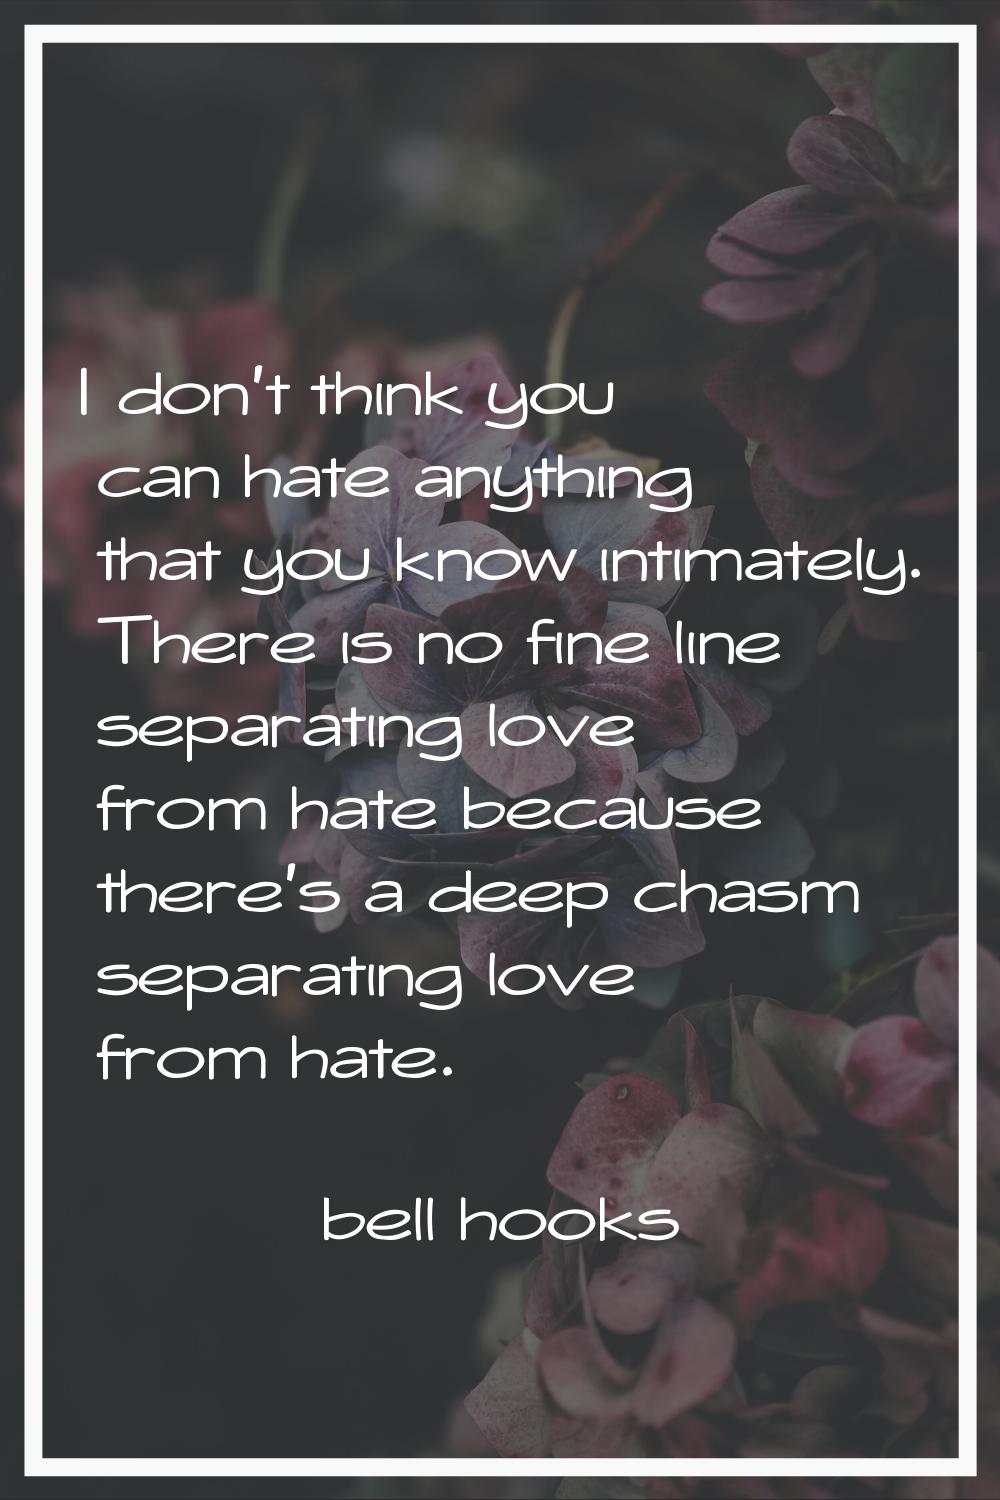 I don't think you can hate anything that you know intimately. There is no fine line separating love